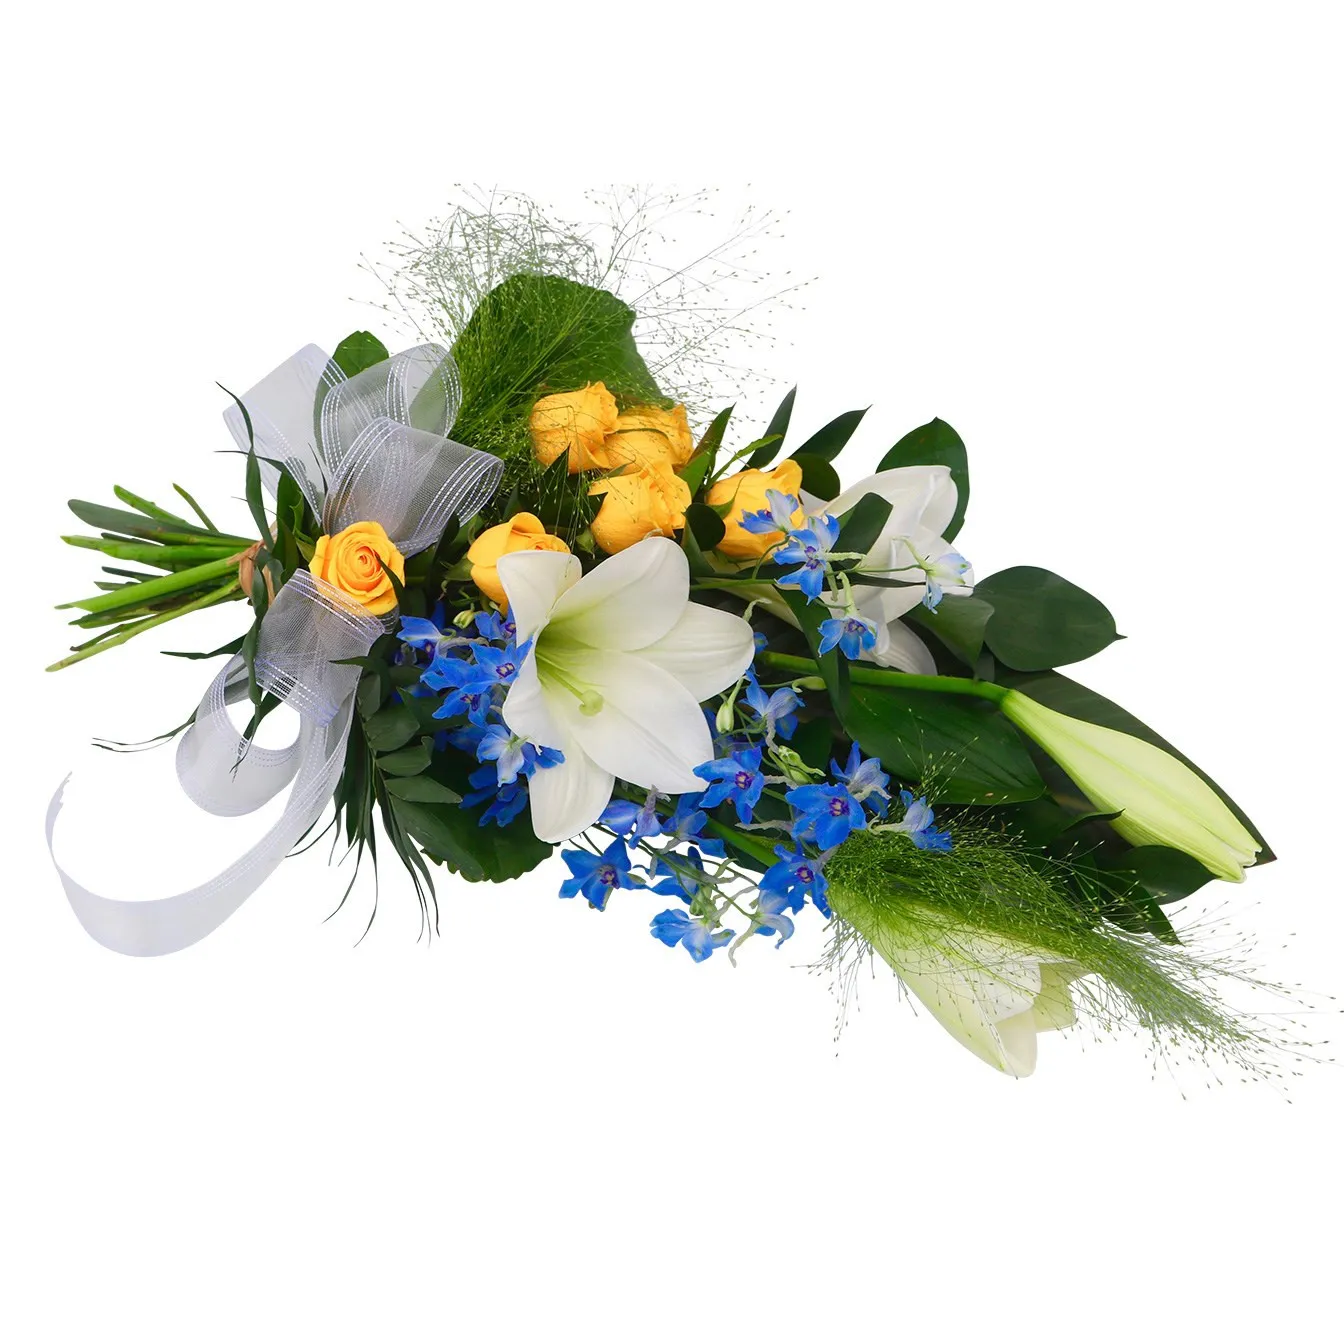 Silence has arrived -funeral bouquet - Finlandia